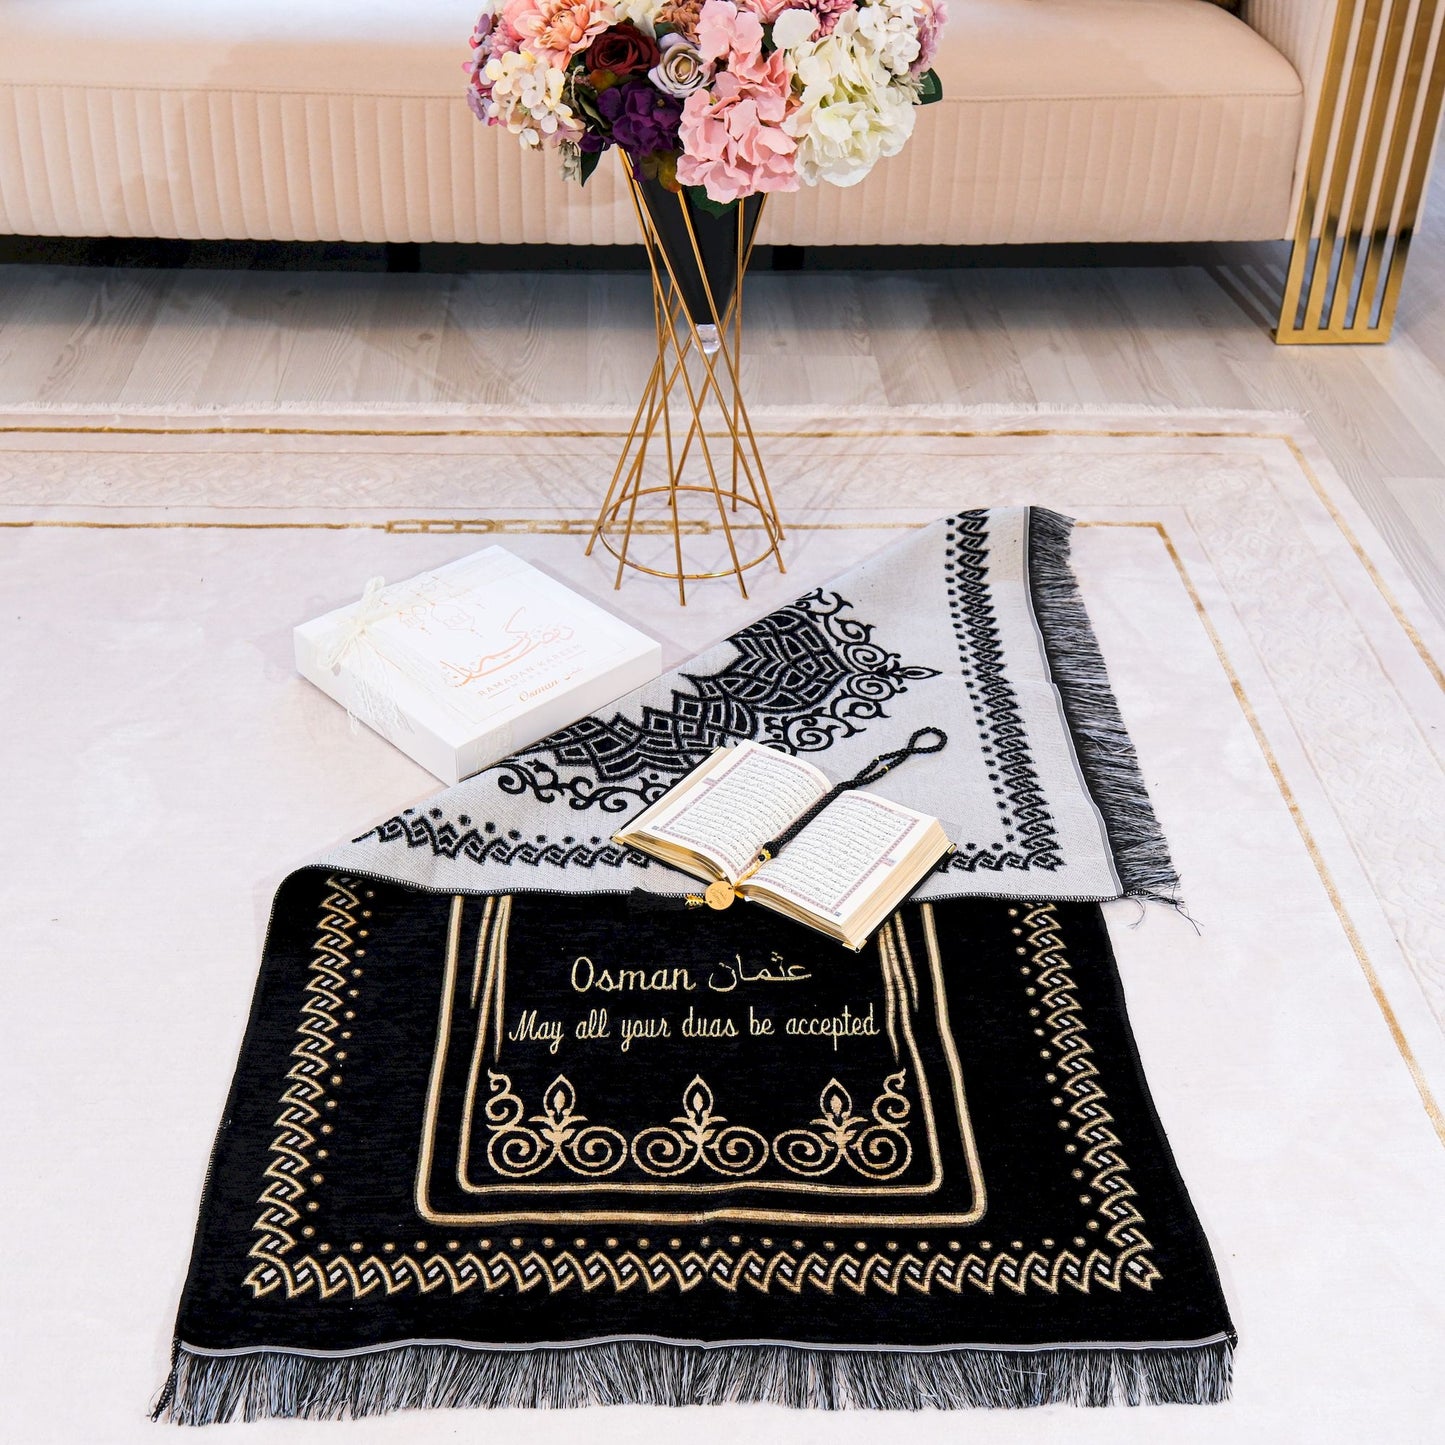 Personalized Dreamy Prayer Mat Quran Tasbeeh Bookmark Islamic Gift Set - Islamic Elite Favors is a handmade gift shop offering a wide variety of unique and personalized gifts for all occasions. Whether you're looking for the perfect Ramadan, Eid, Hajj, wedding gift or something special for a birthday, baby shower or anniversary, we have something for everyone. High quality, made with love.